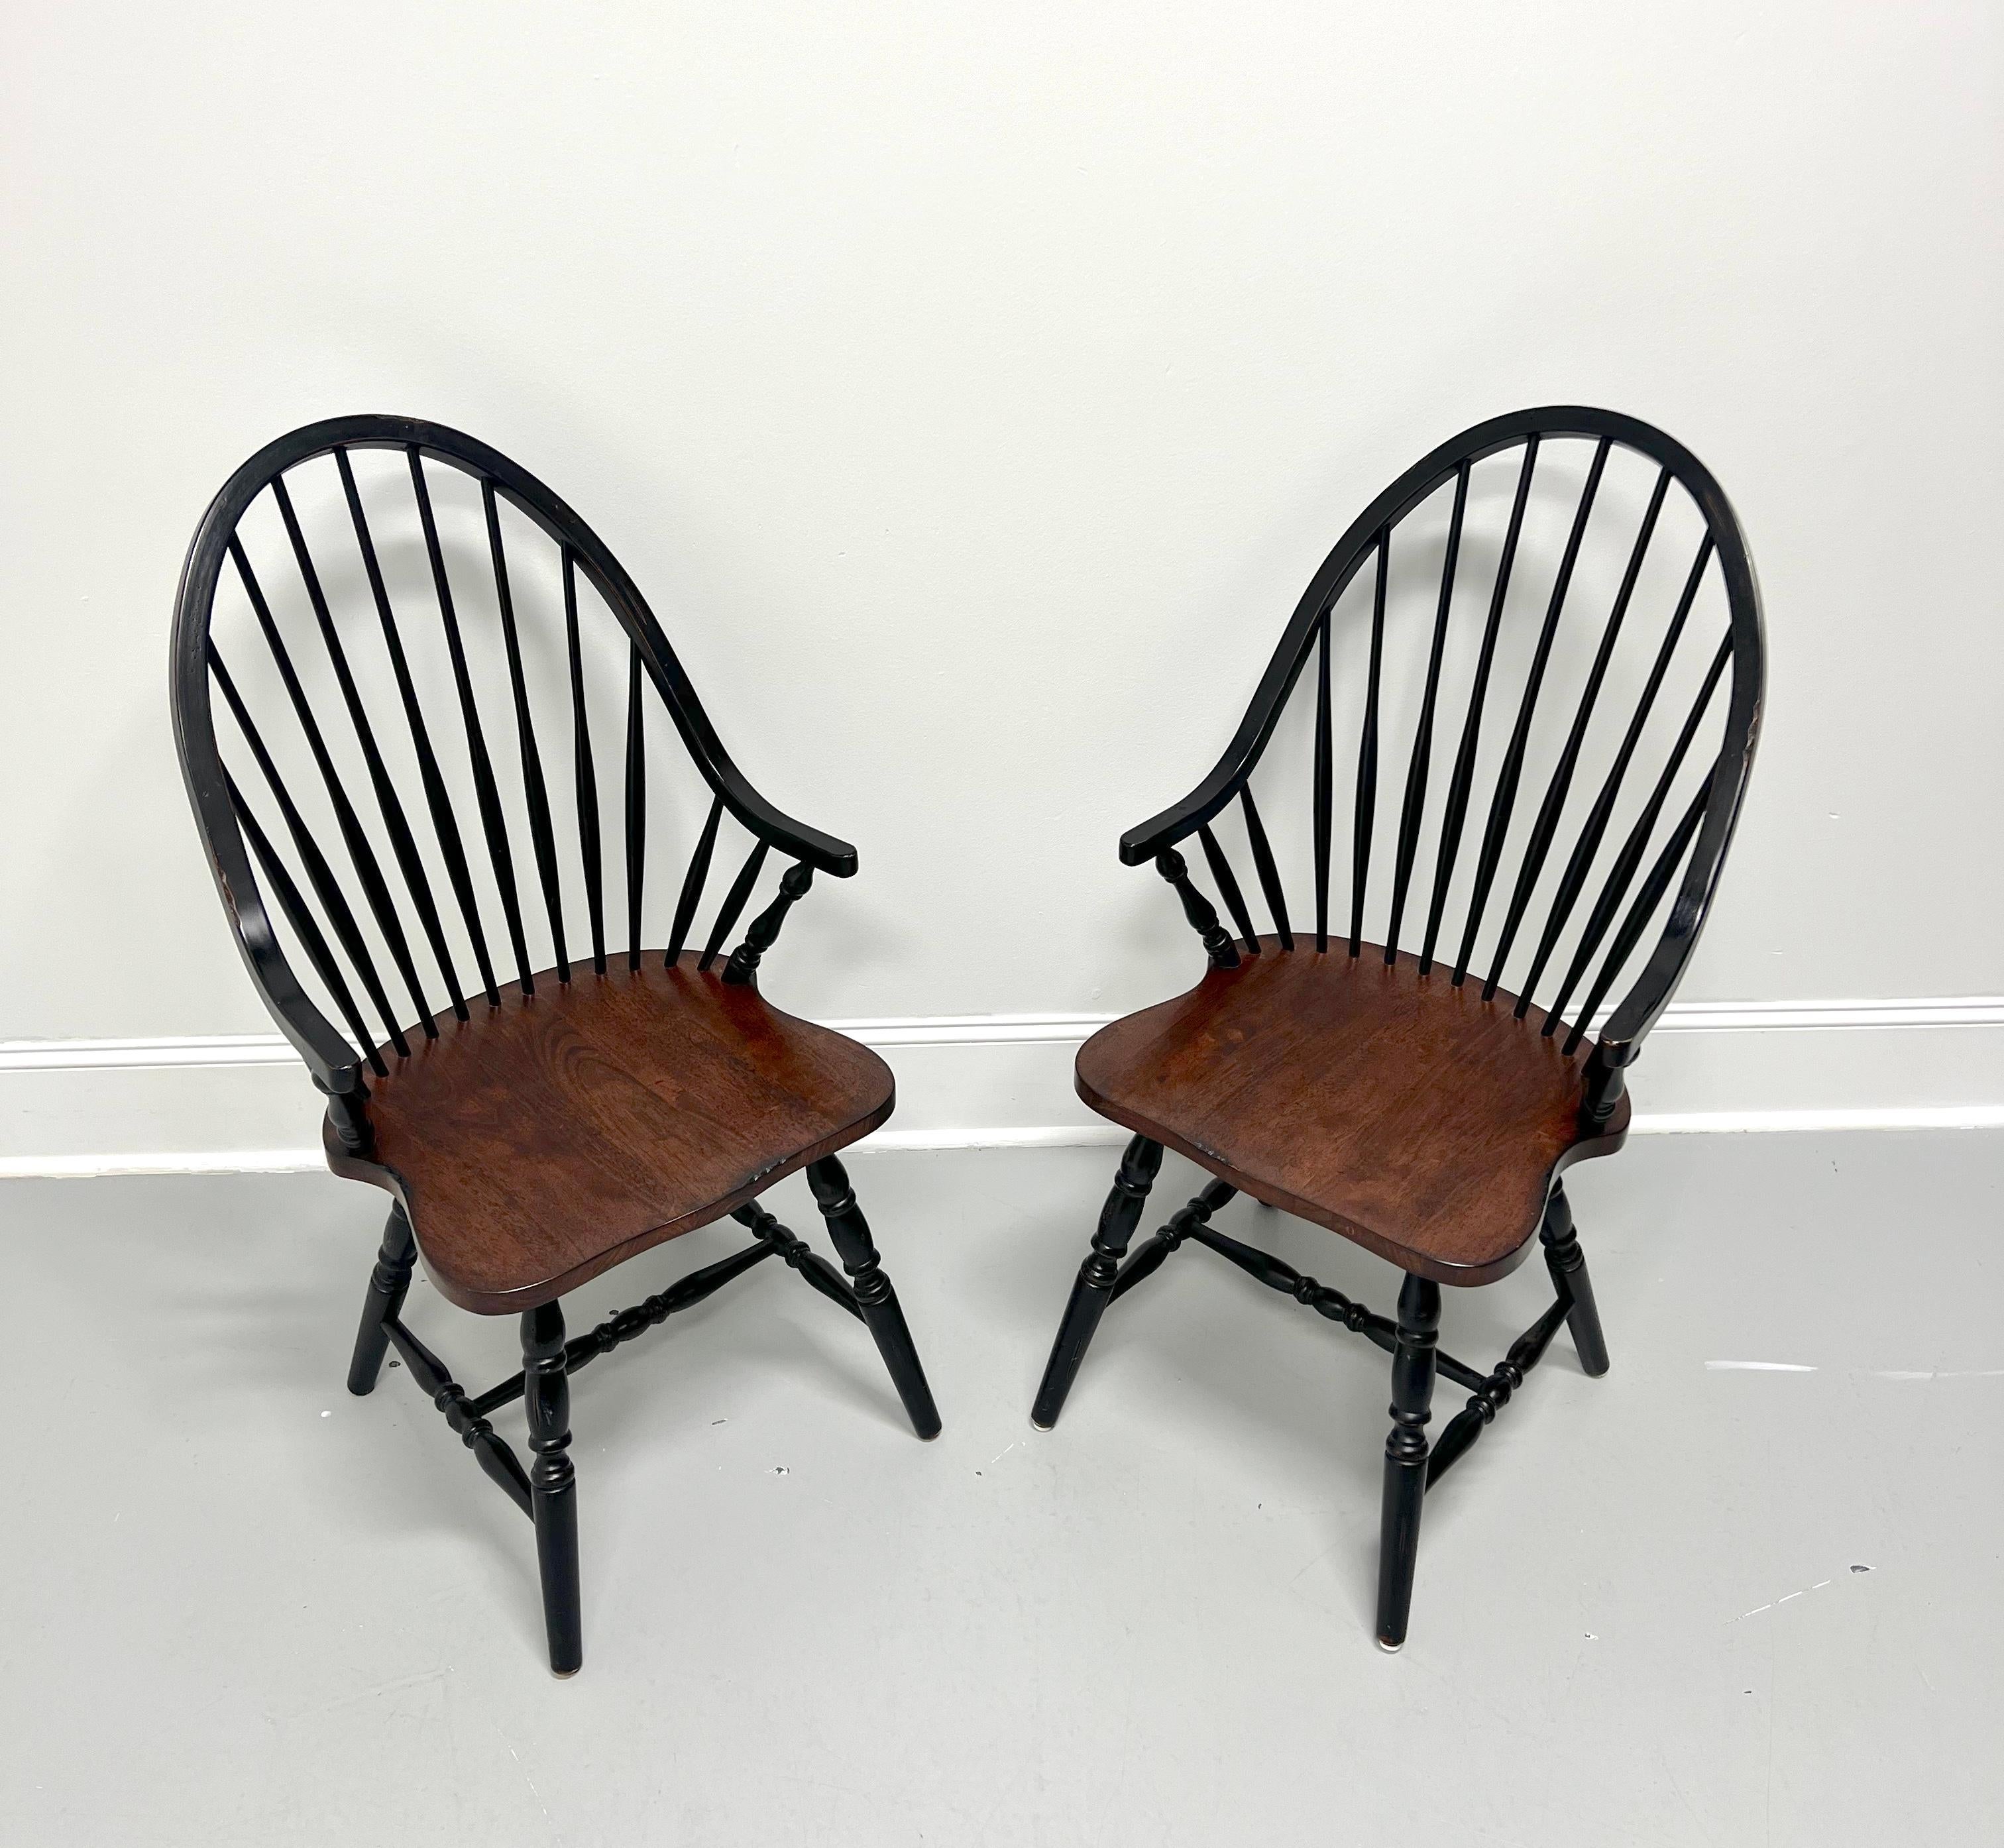 A pair of Windsor dining armchairs, unbranded. Nutwood with back, legs & stretchers painted black, bowback, tapered spindles, short arms with turned supports, solid seat with a distressed stained finish, turned legs, and turned stretchers.  Made in